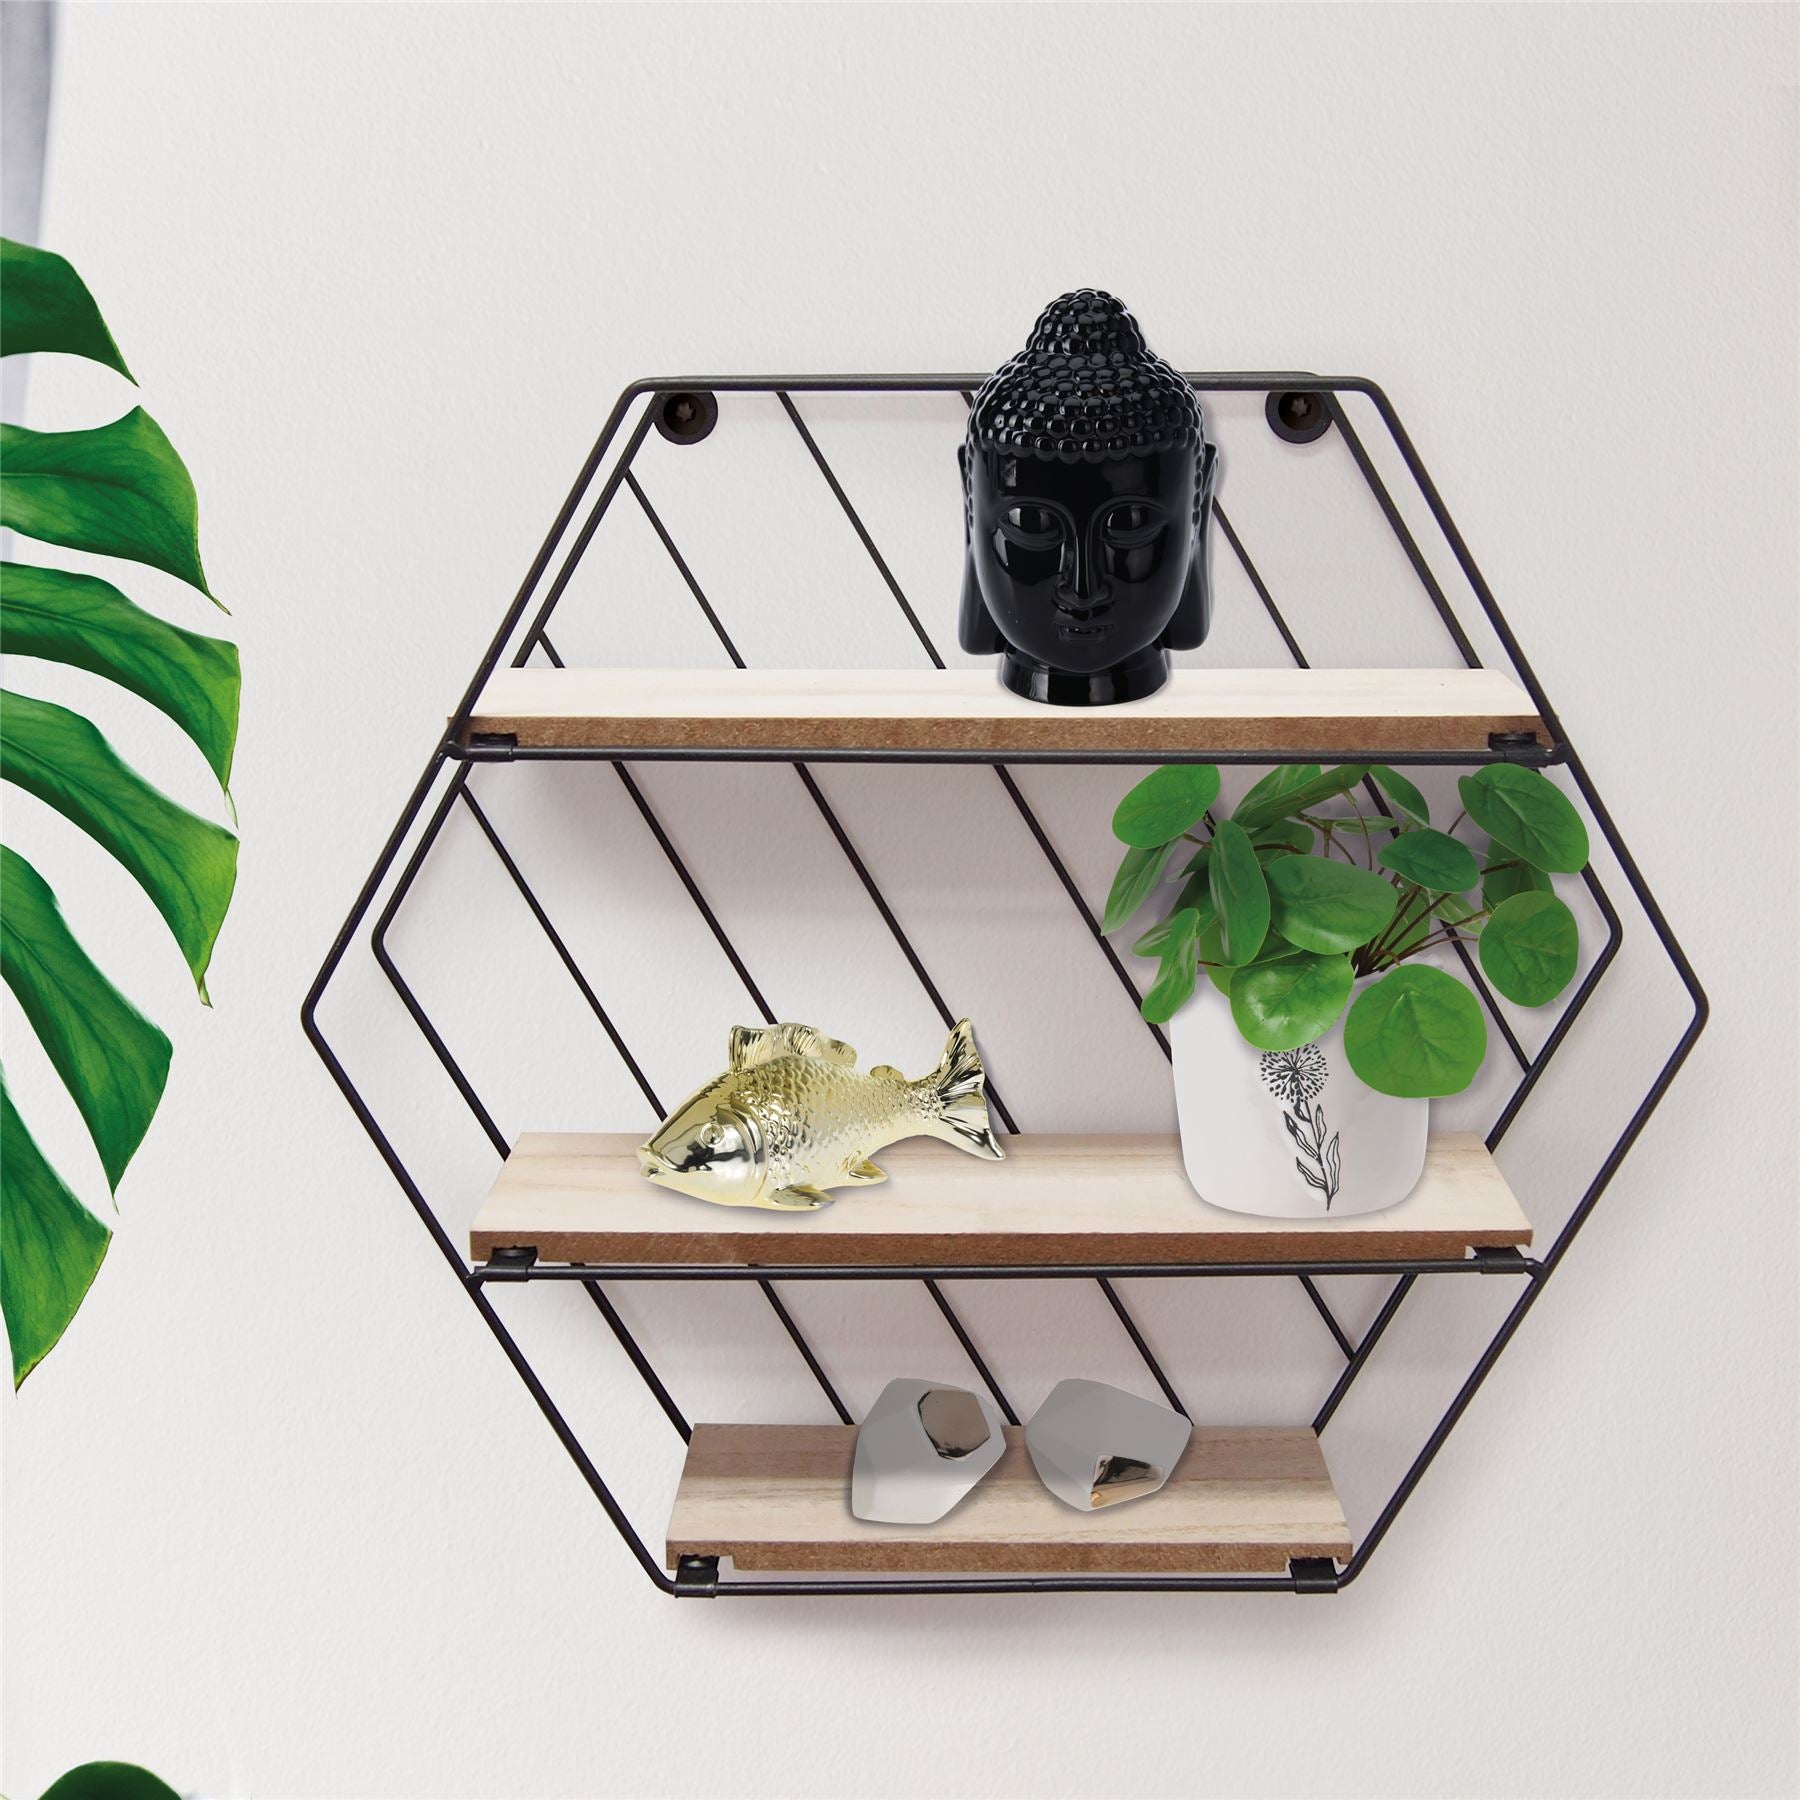 Modern Shelf of Metal Wire and Wood Perfect for Storaging Small Items by Geezy - UKBuyZone